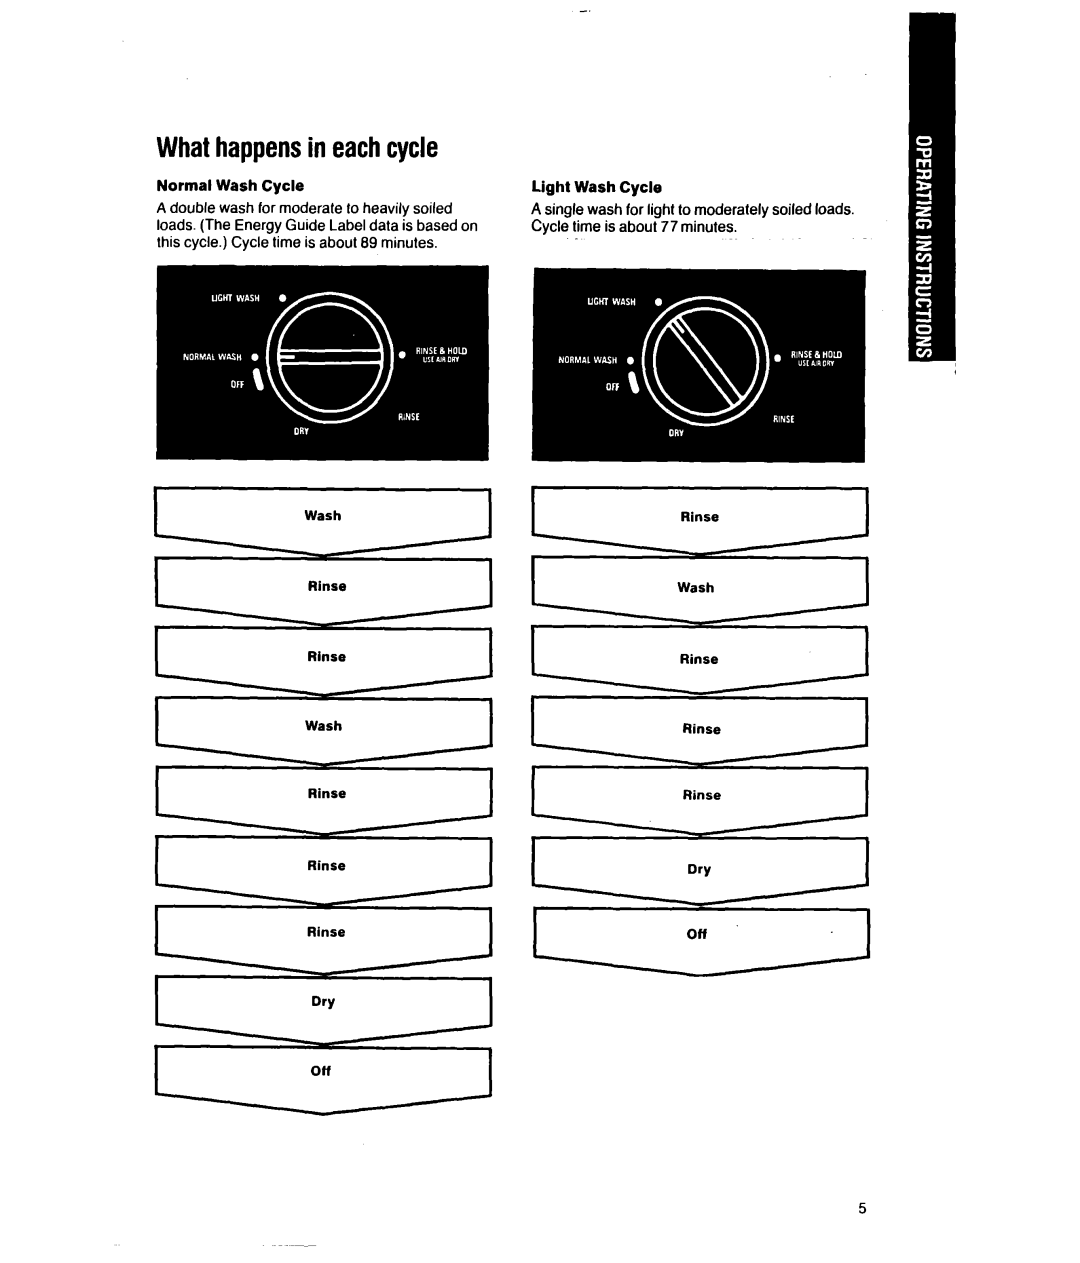 Whirlpool 8000 Series manual Whathappensin eachcycle 